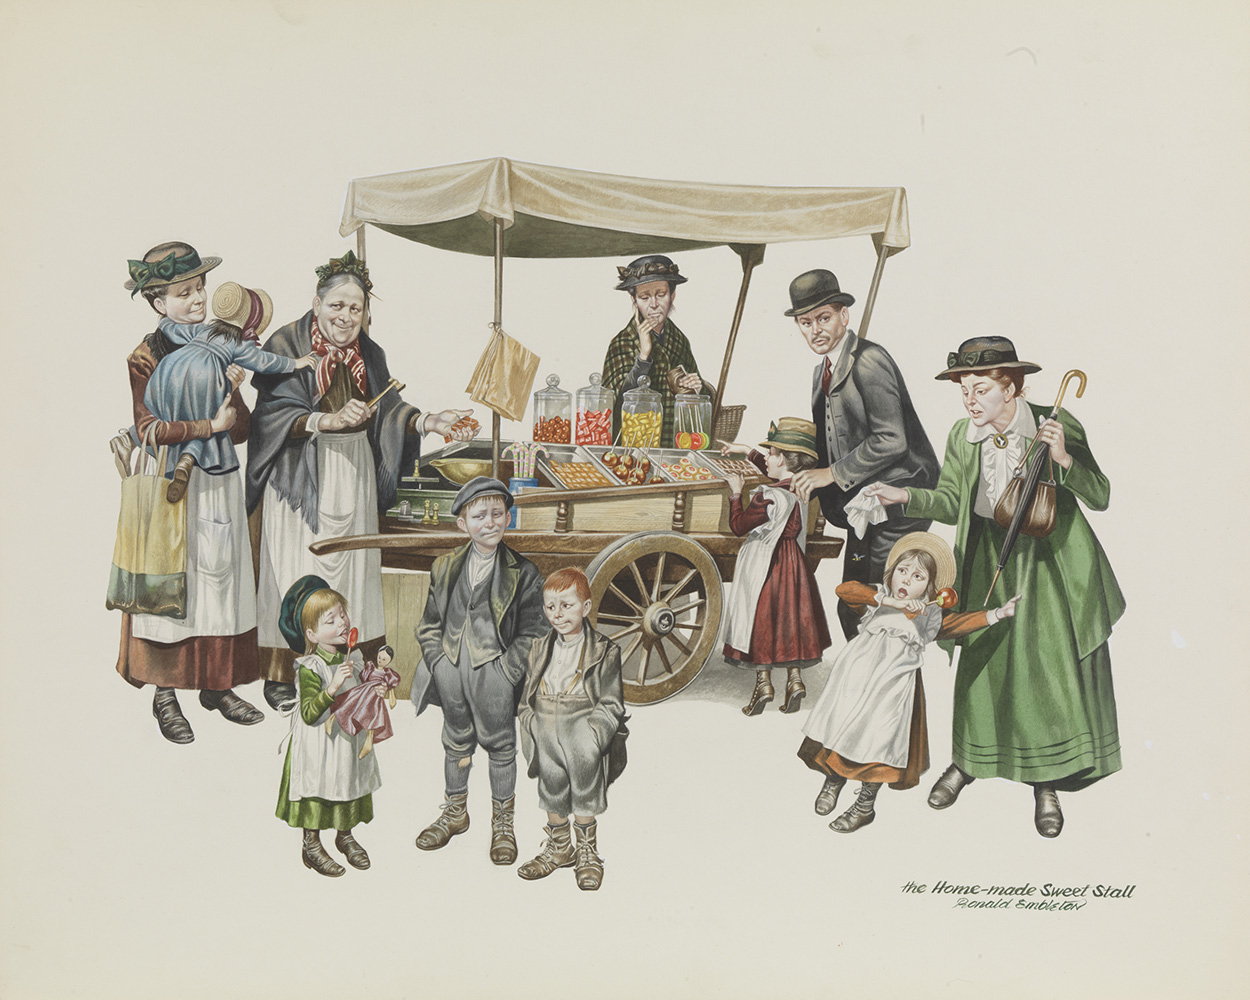 The Homemade Sweet Stall (Original) (Signed) art by Victorian and Edwardian Britain (Ron Embleton) at The Illustration Art Gallery